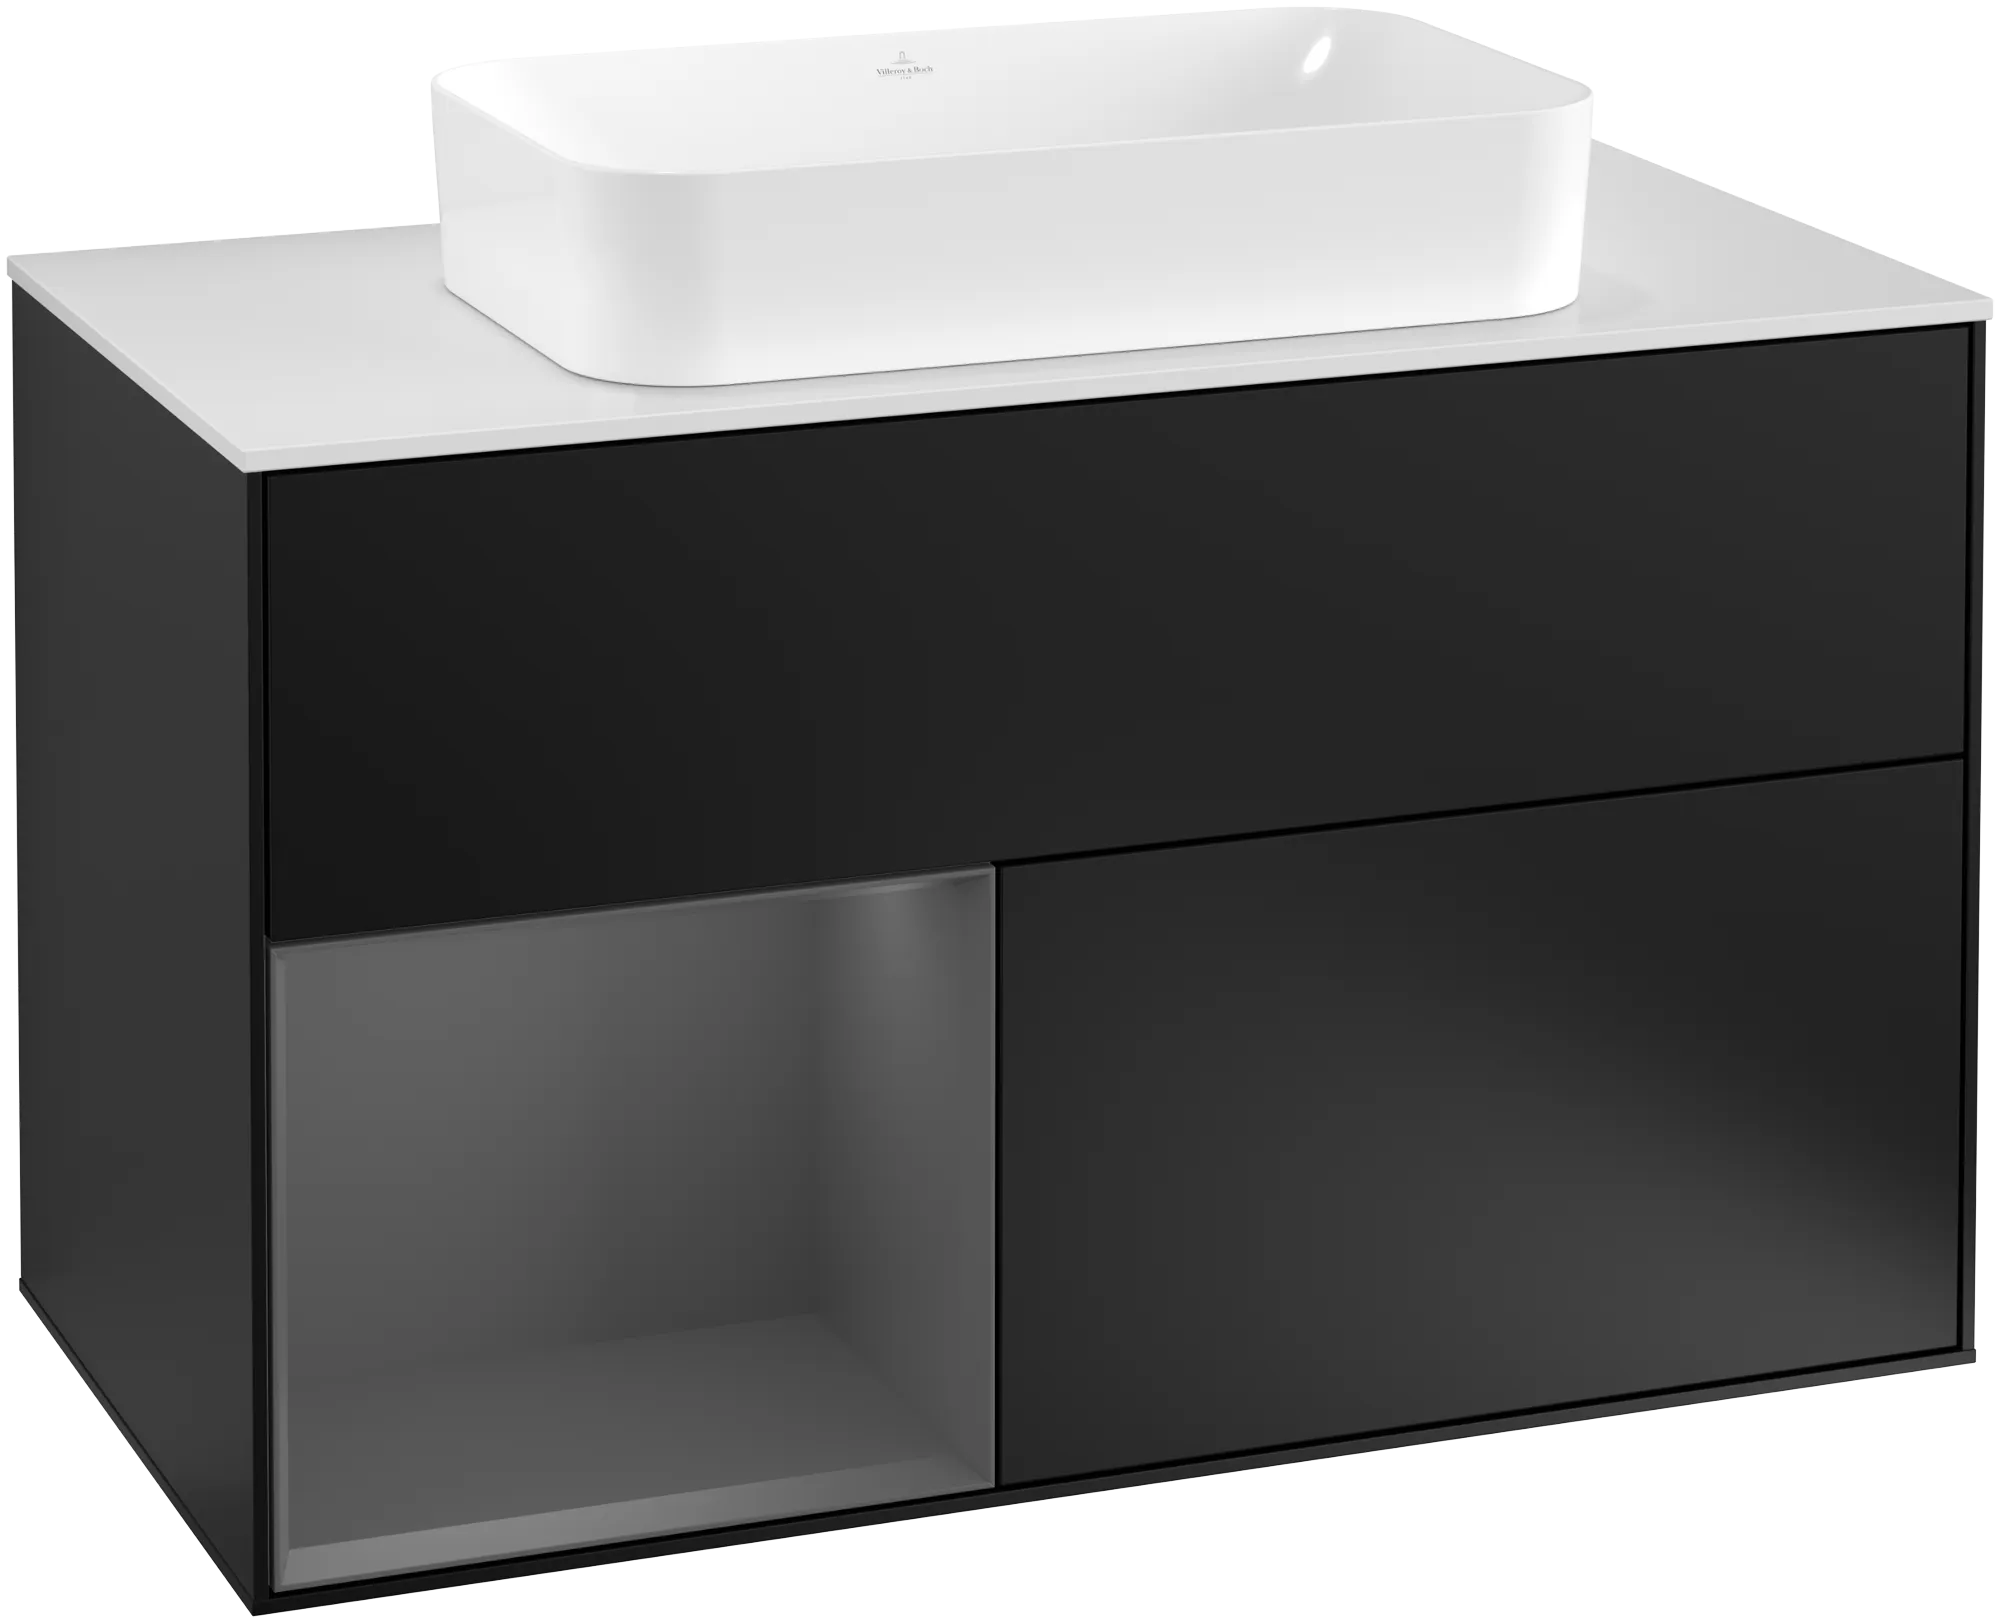 Picture of VILLEROY BOCH Finion Vanity unit, with lighting, 2 pull-out compartments, 1000 x 603 x 501 mm, Black Matt Lacquer / Anthracite Matt Lacquer / Glass White Matt #G241GKPD